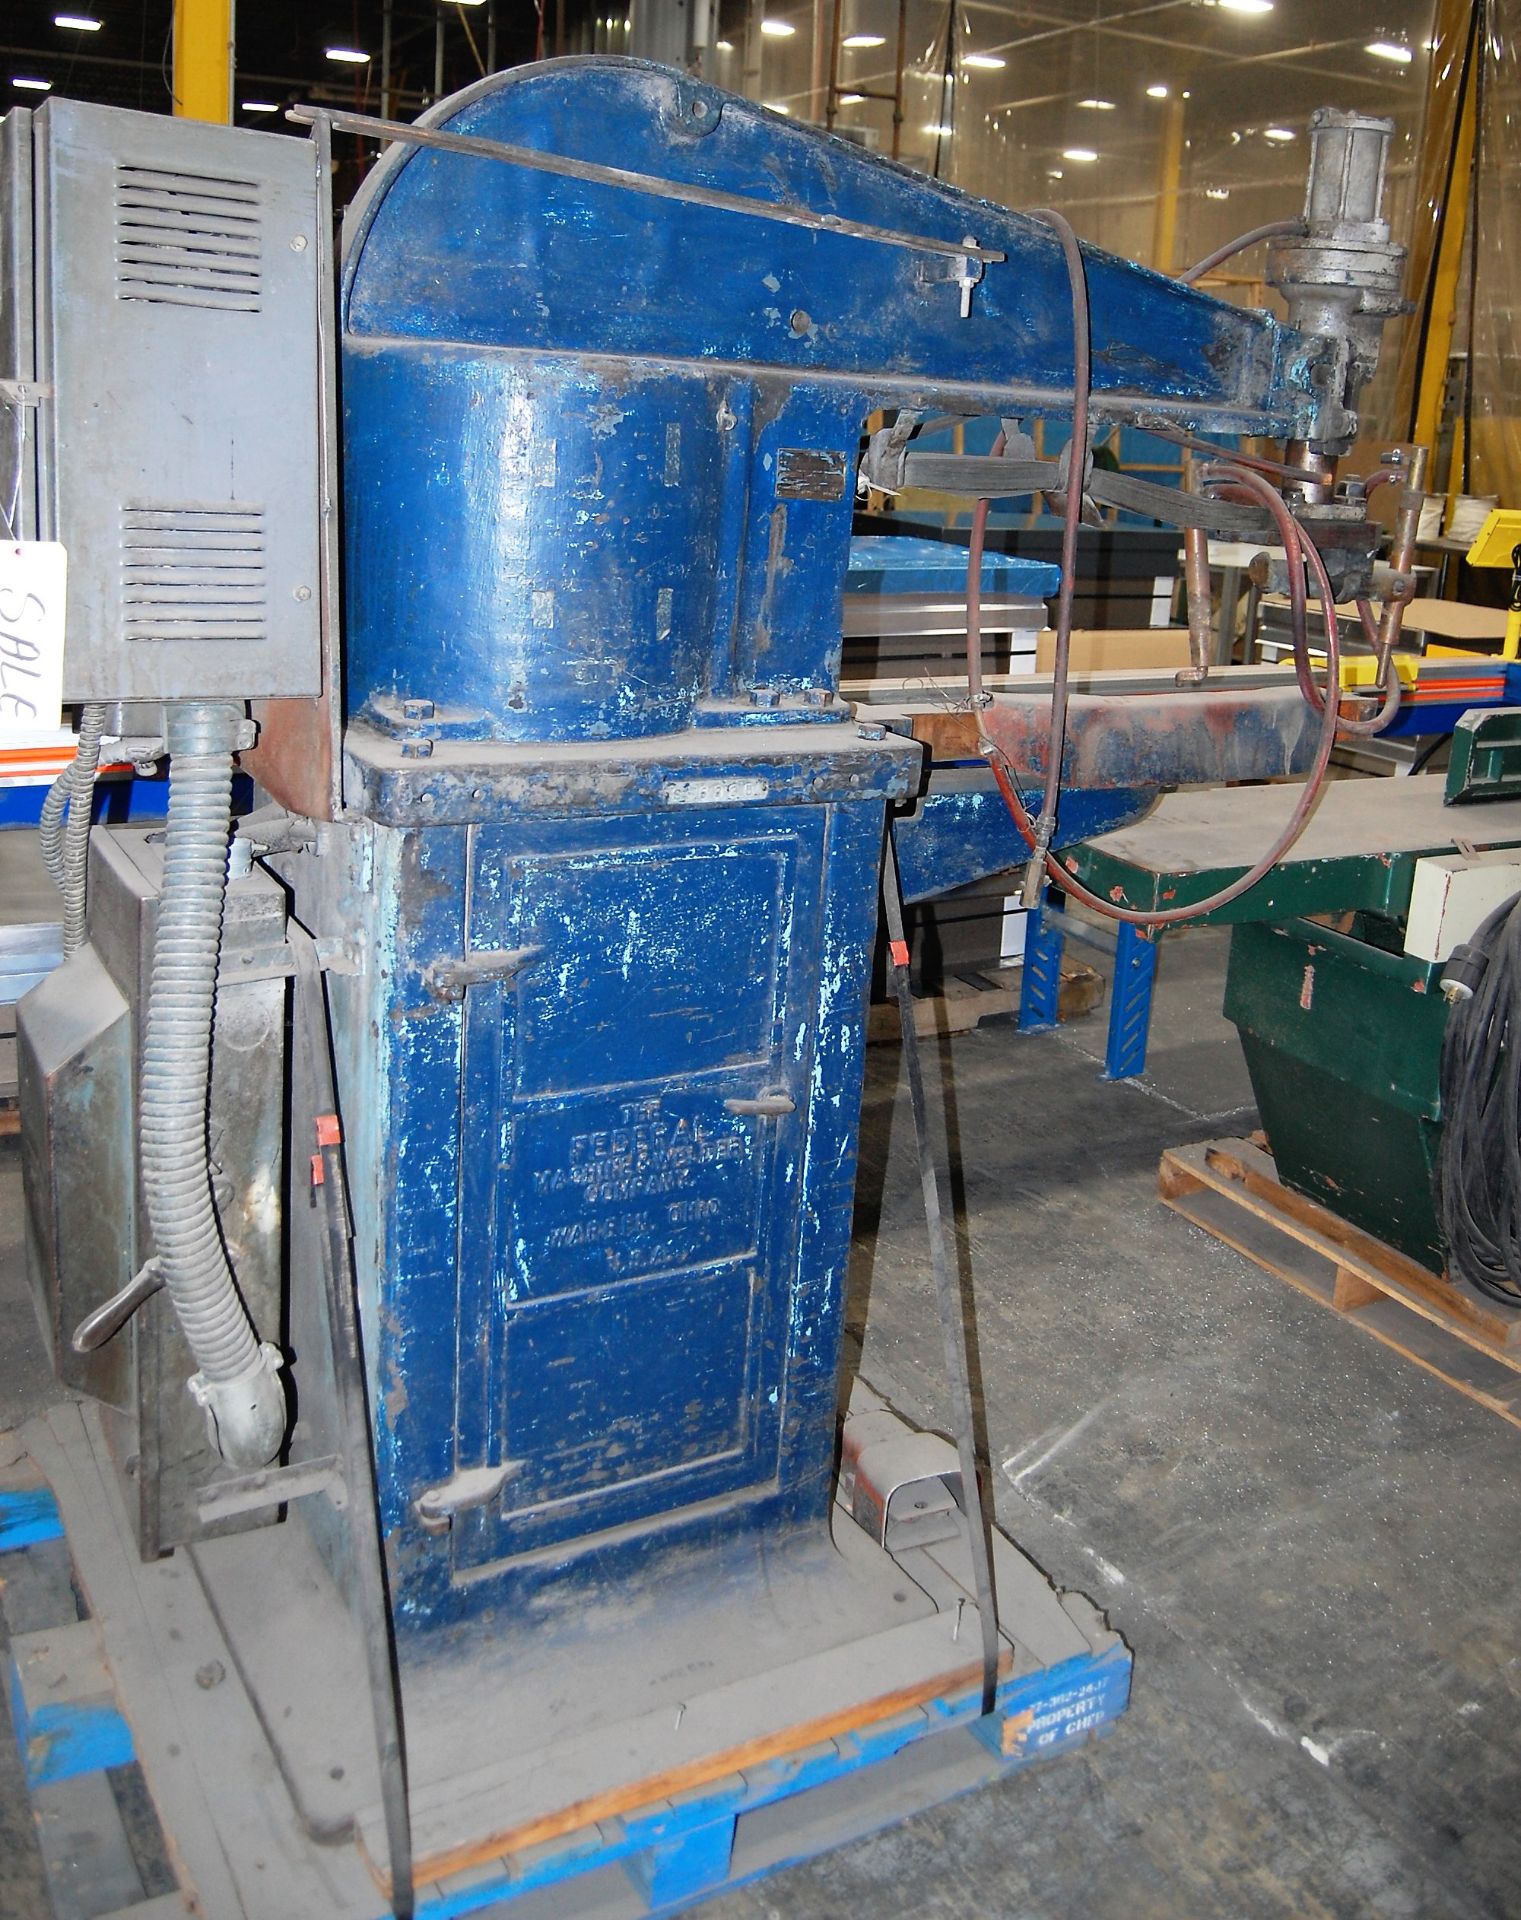 FEDERAL MDL. 444BCA 19kw SPOT WELDER, 220-VOLTS, WITH 41" THROAT, FOOT SWITCH, S/N: 48791 [LOCATED